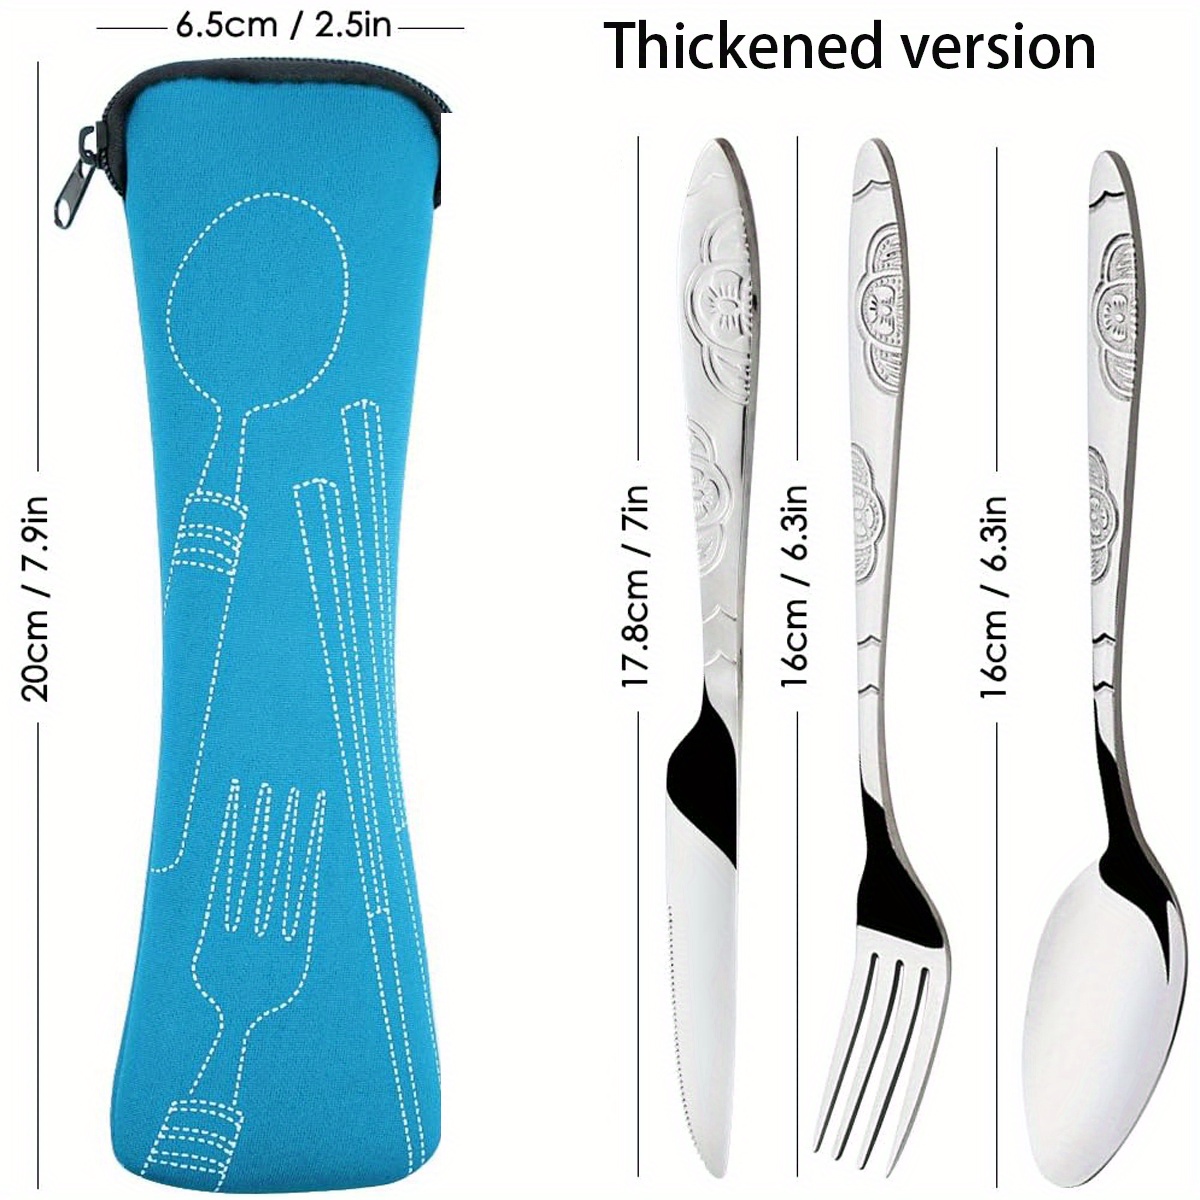 Large Traditional Travel Flatware Set with Steak Knife (Satin Black) –  Forked Again